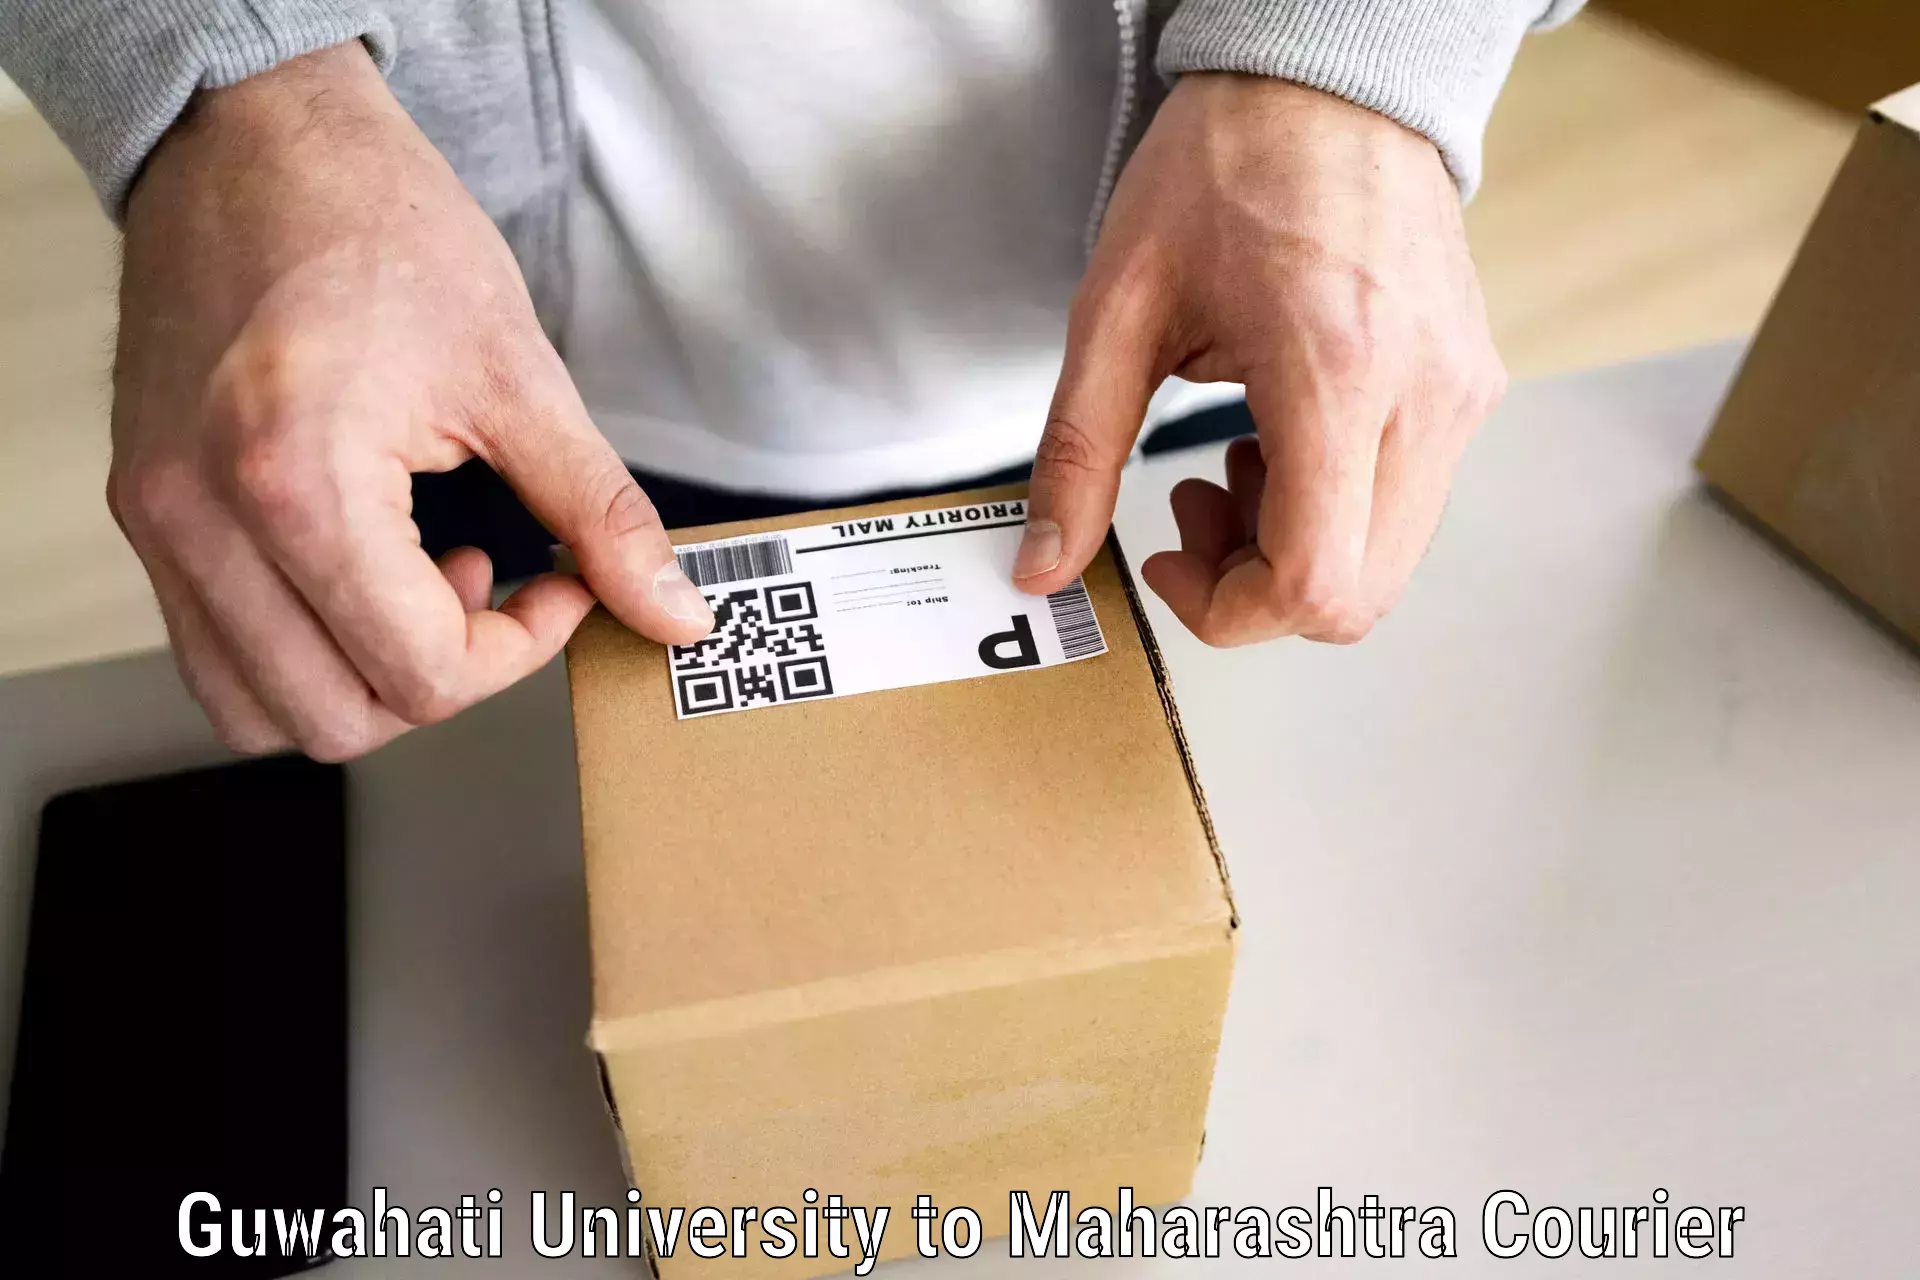 Household goods movers and packers in Guwahati University to Maharashtra